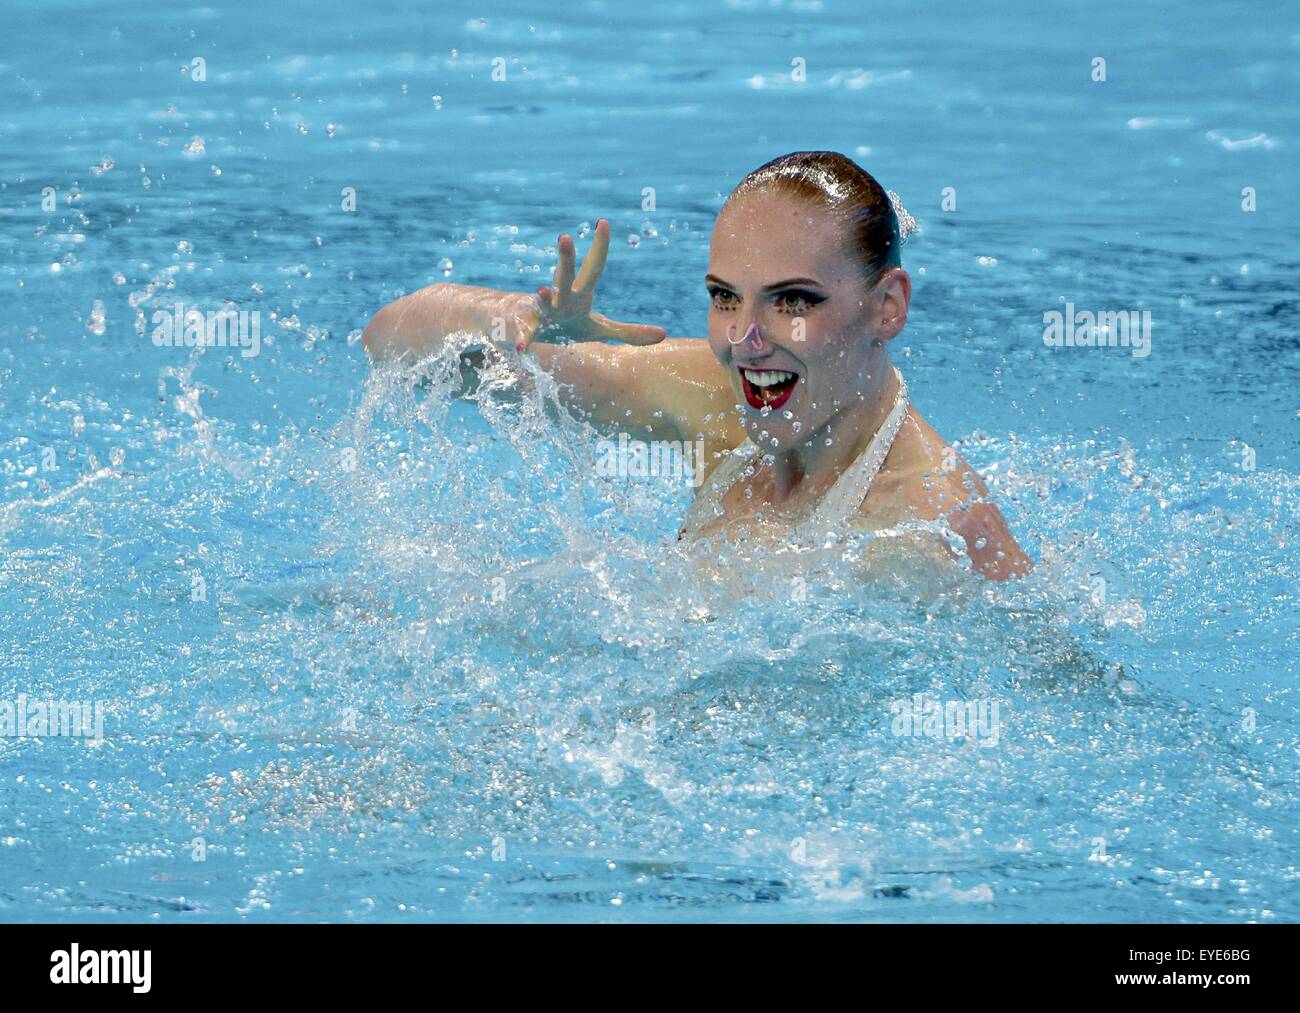 July 25, 2015. - Russia, Kazan. - FINA Swimming World Cup in Kazan 2015. In  picture: Svetlana Romashina of Russia performs her technical program during  the synchronized swimming solo competition Stock Photo - Alamy